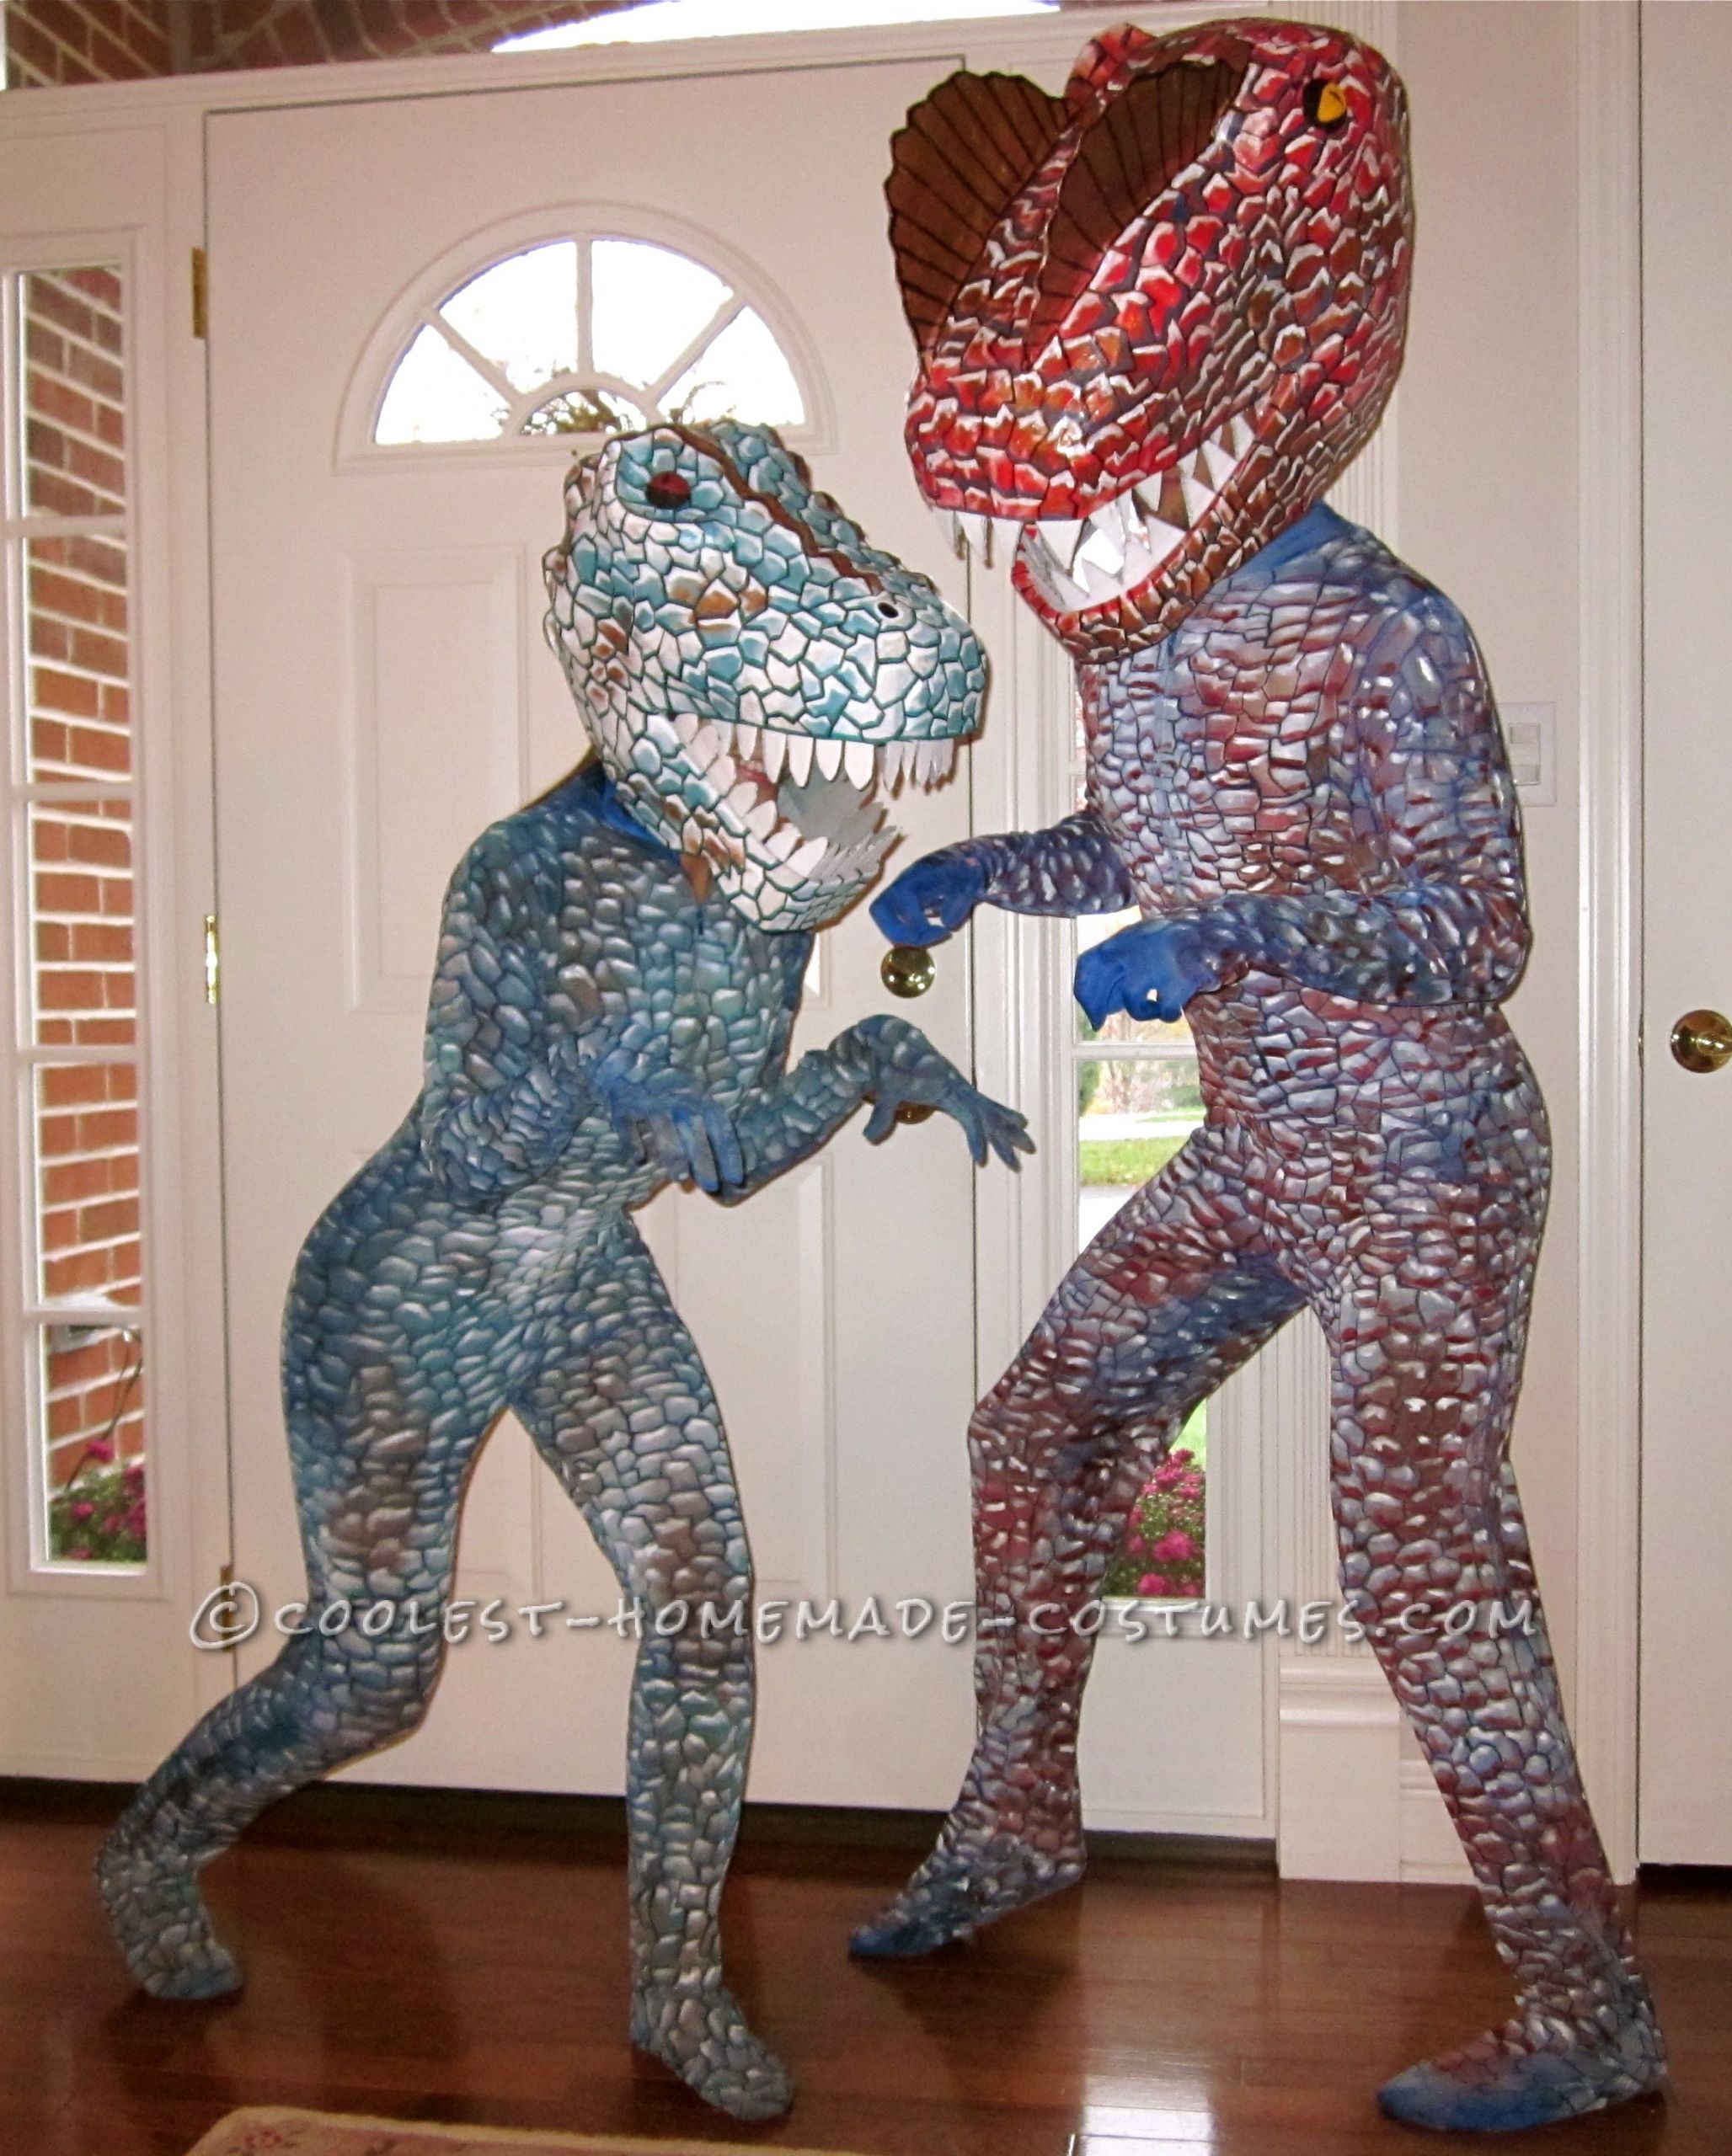 DIY Dinosaur Costumes For Adults
 Super Cool Homemade Dinosaur Couple Costume